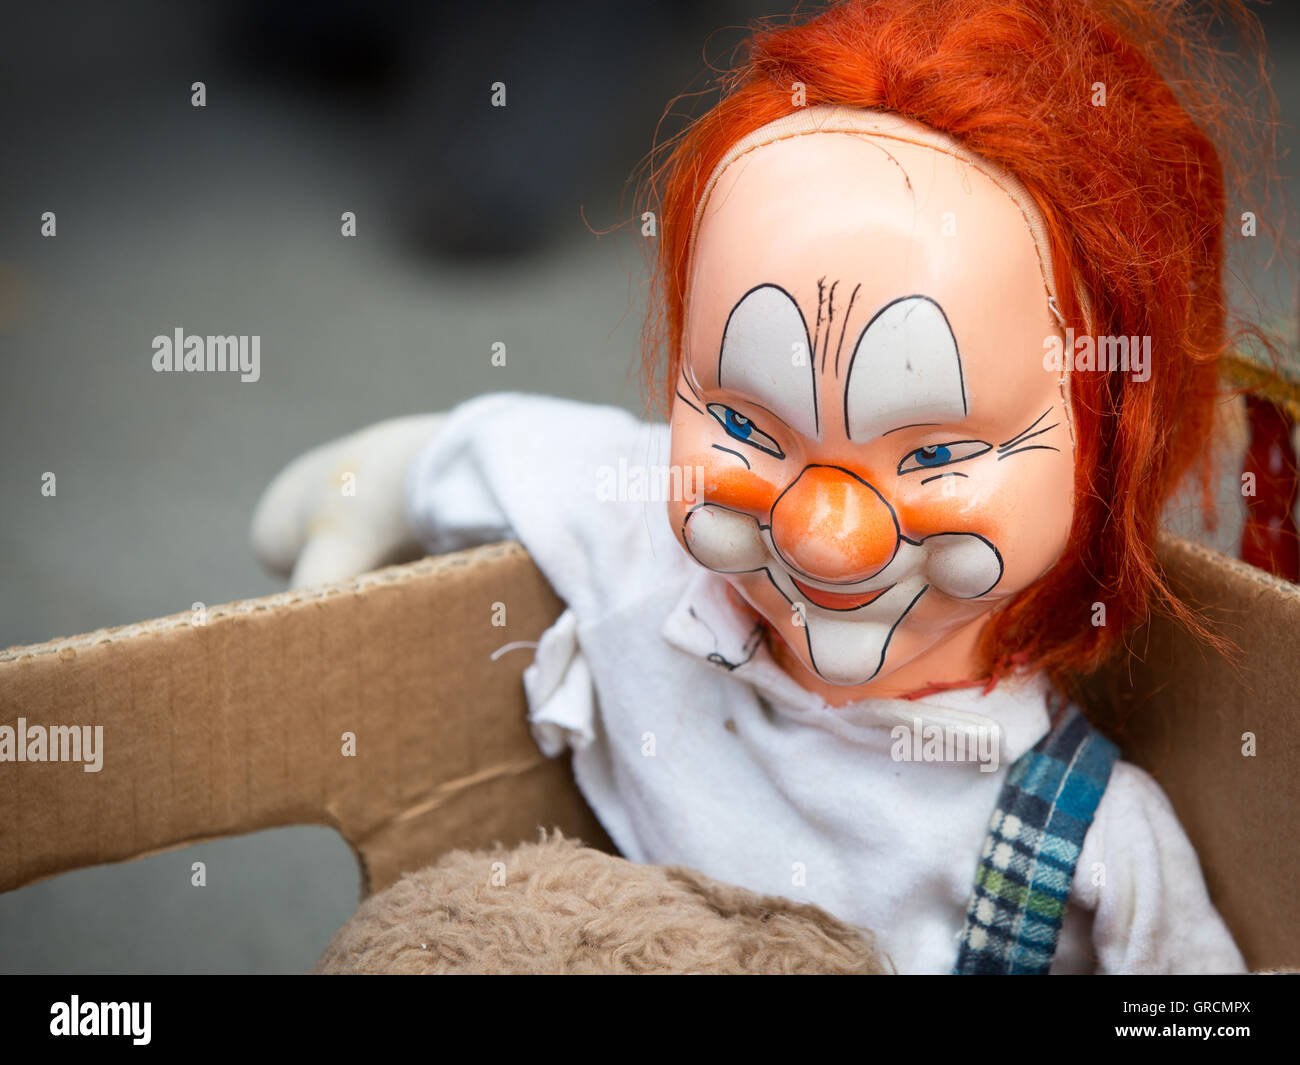 Grinning Clown Doll Stock Photo